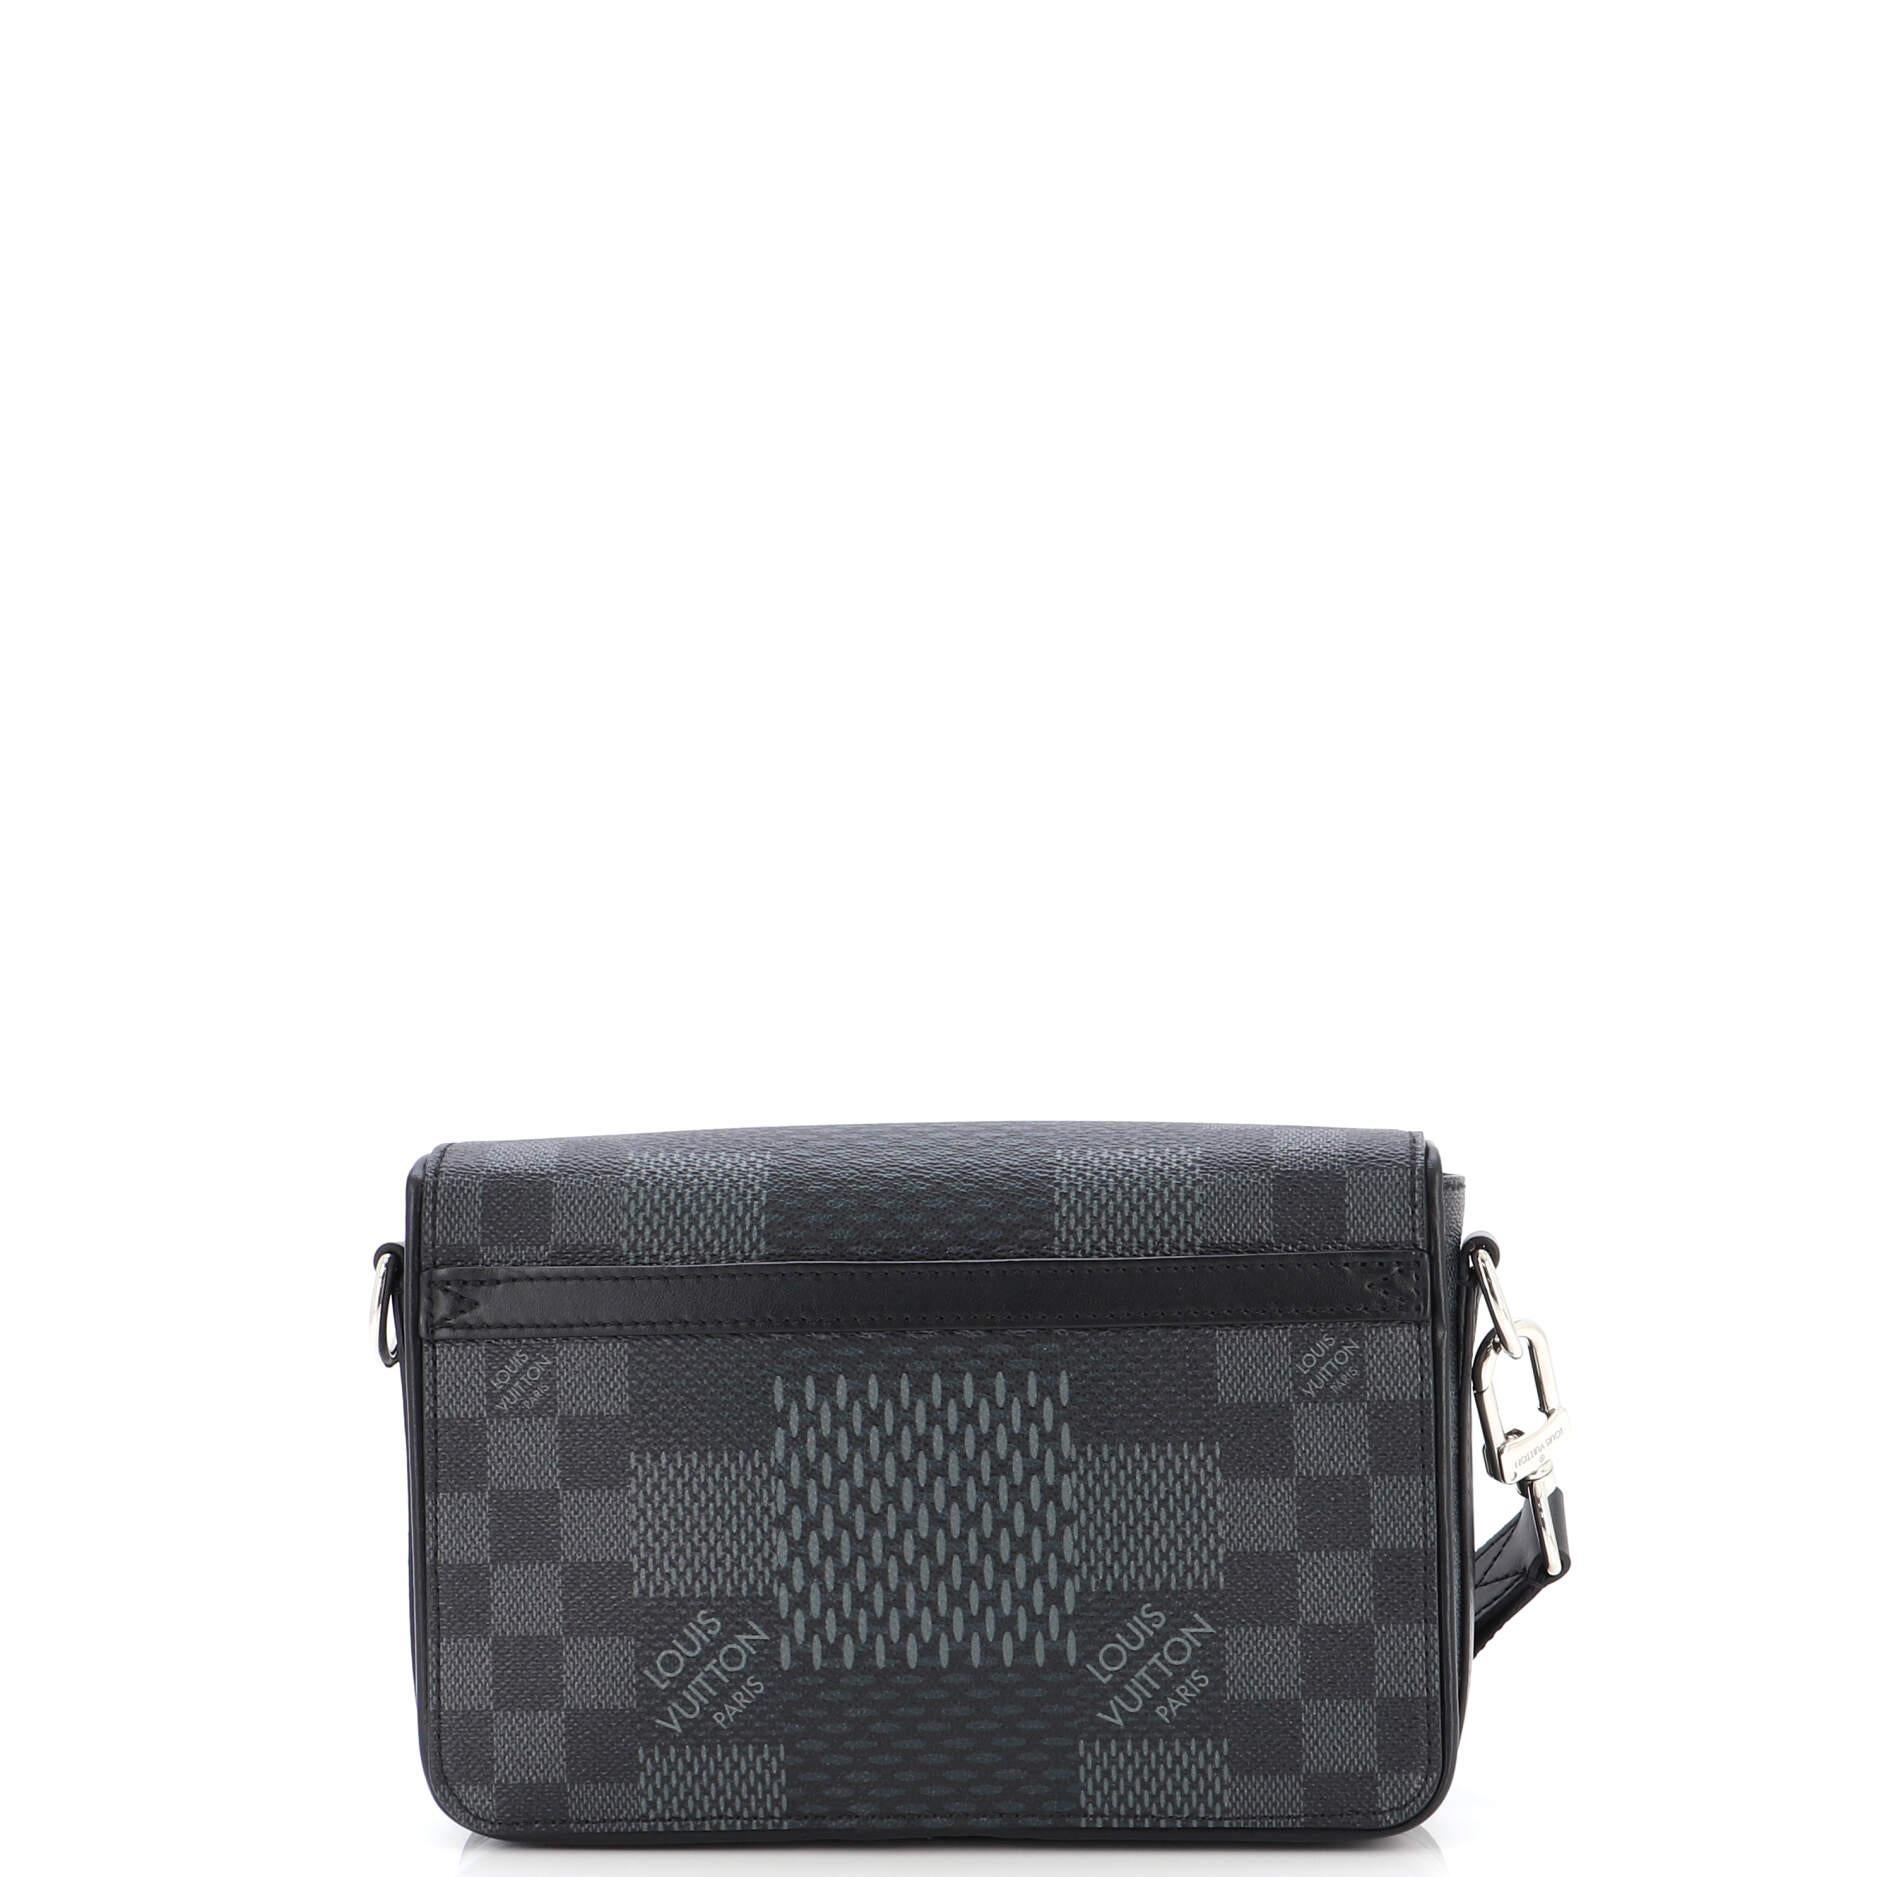 Louis Vuitton Studio Messenger Bag Limited Edition Damier Graphite 3D In Good Condition For Sale In NY, NY